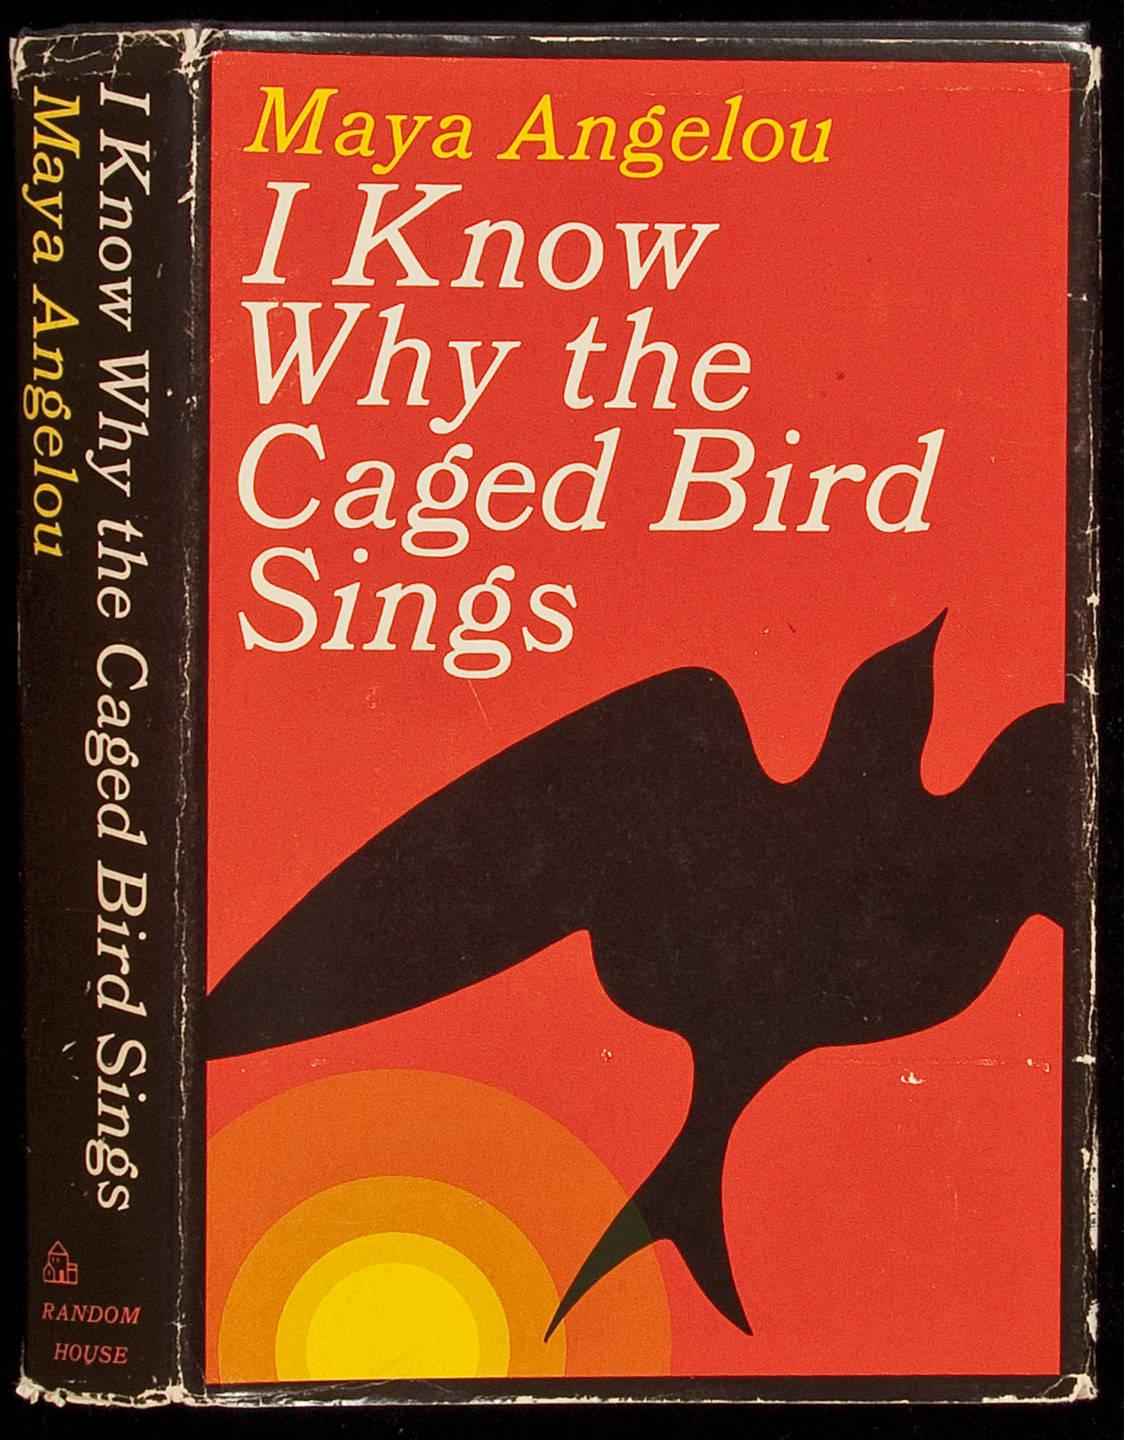 Image result for maya angelou i know why the caged bird sings